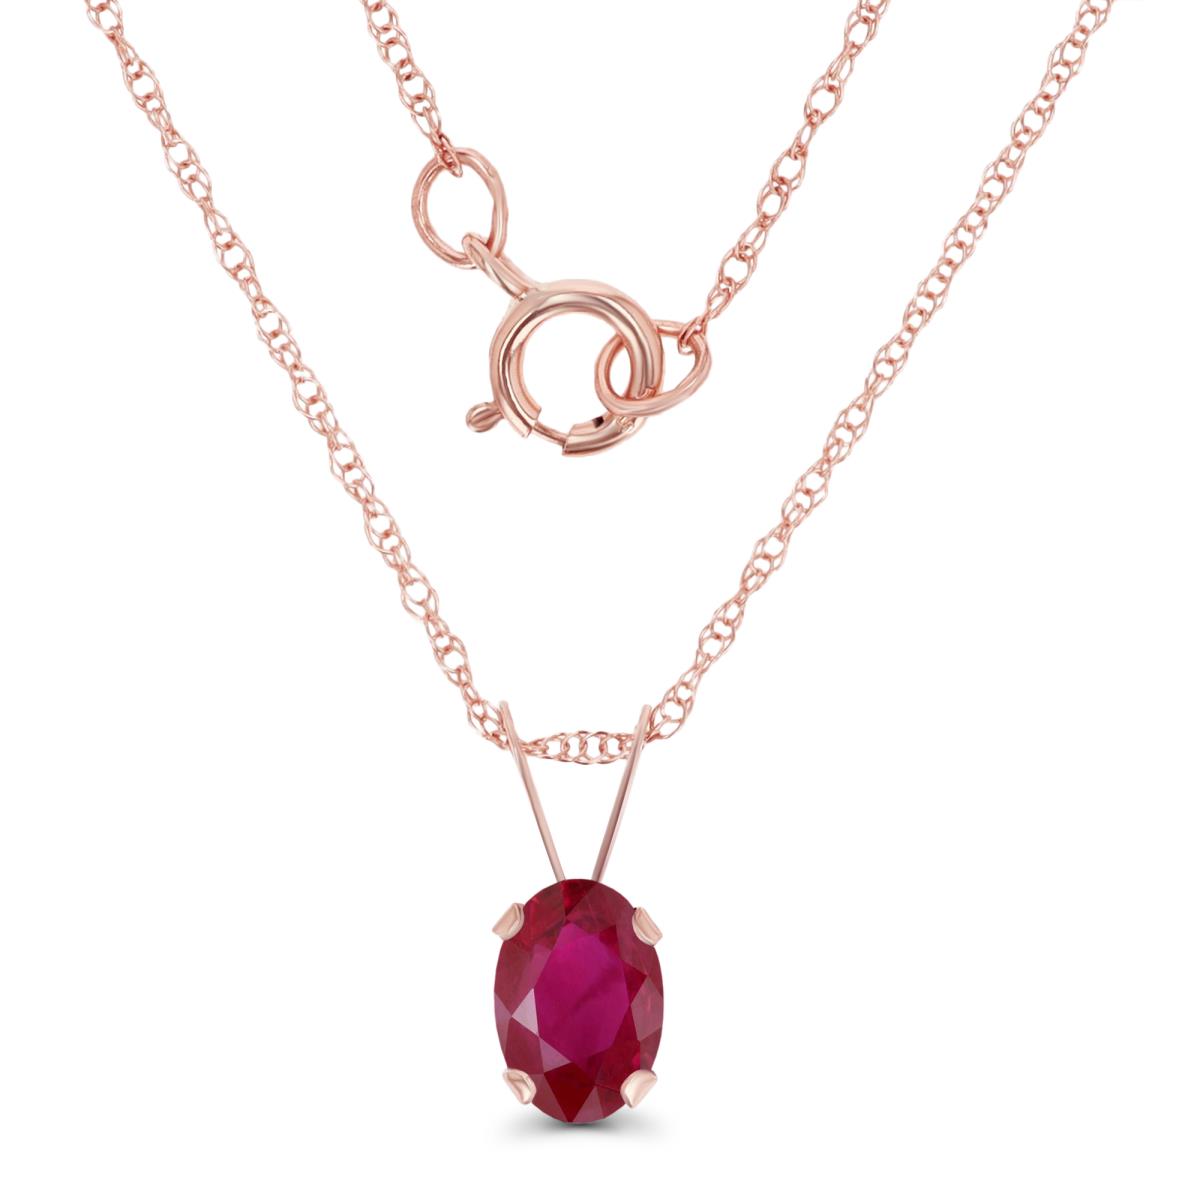 10K Rose Gold 6x4mm Oval Glass Filled Ruby 18" Rope Chain Necklace